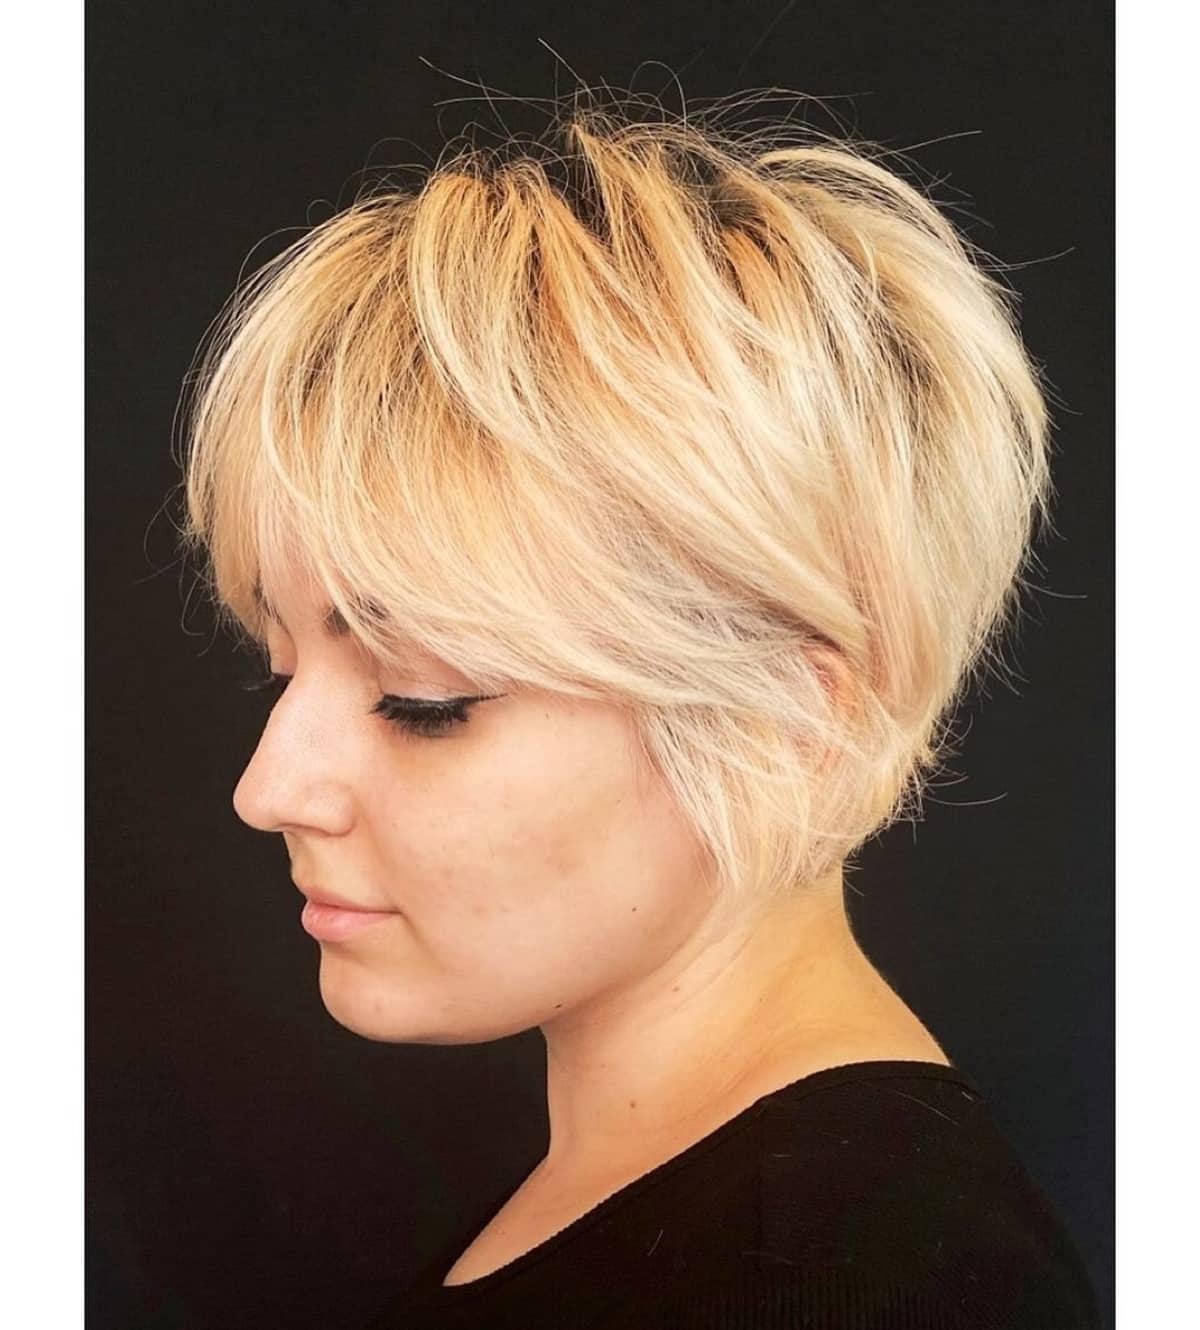 Textured shaggy pixie hairstyle